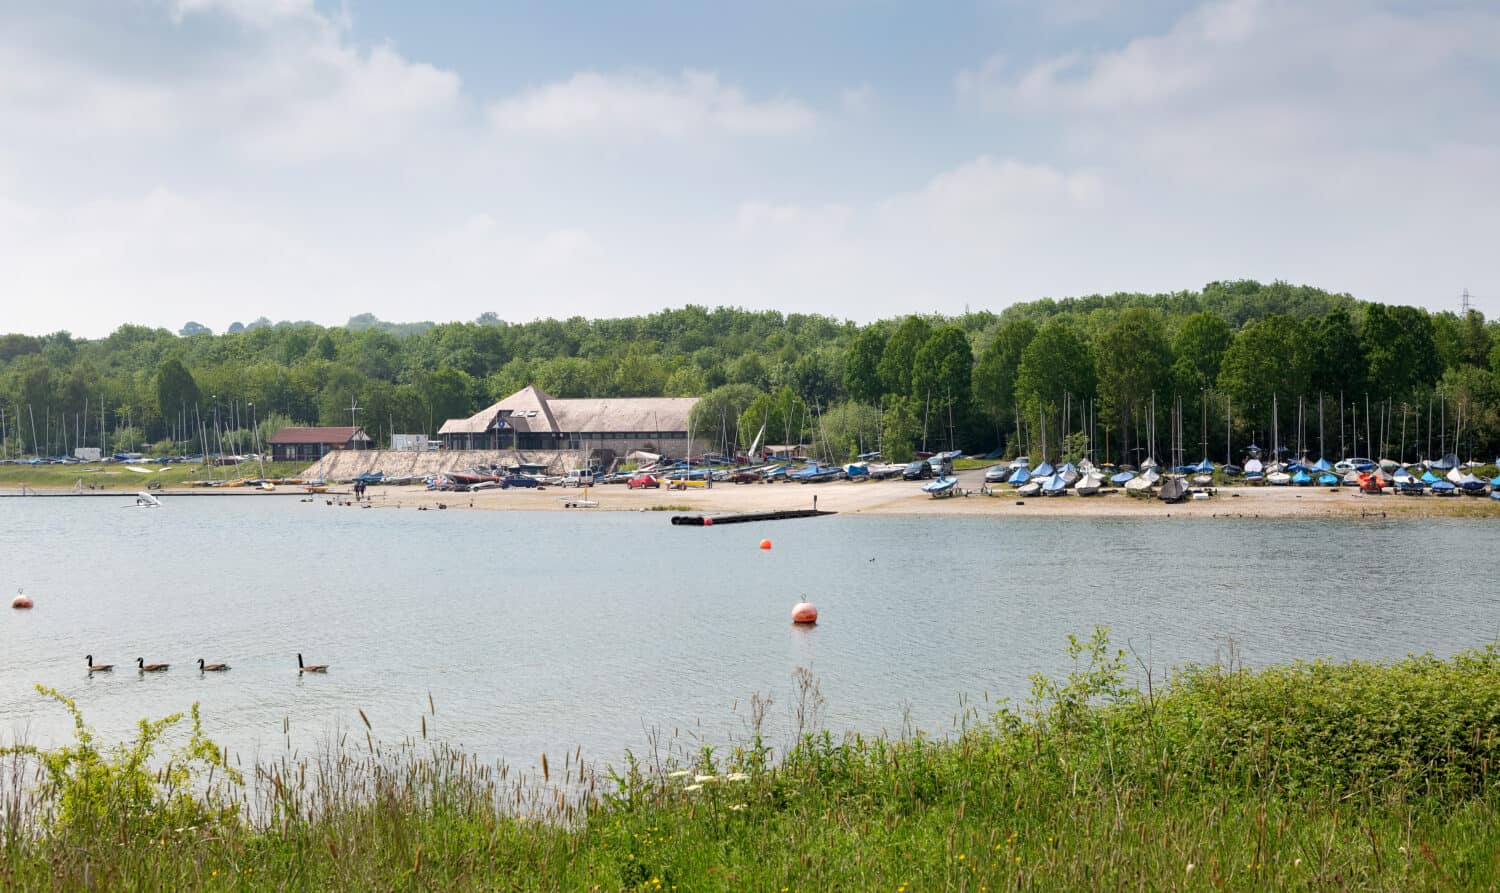 Carsington Water, a popular tourist destination for walking and boating